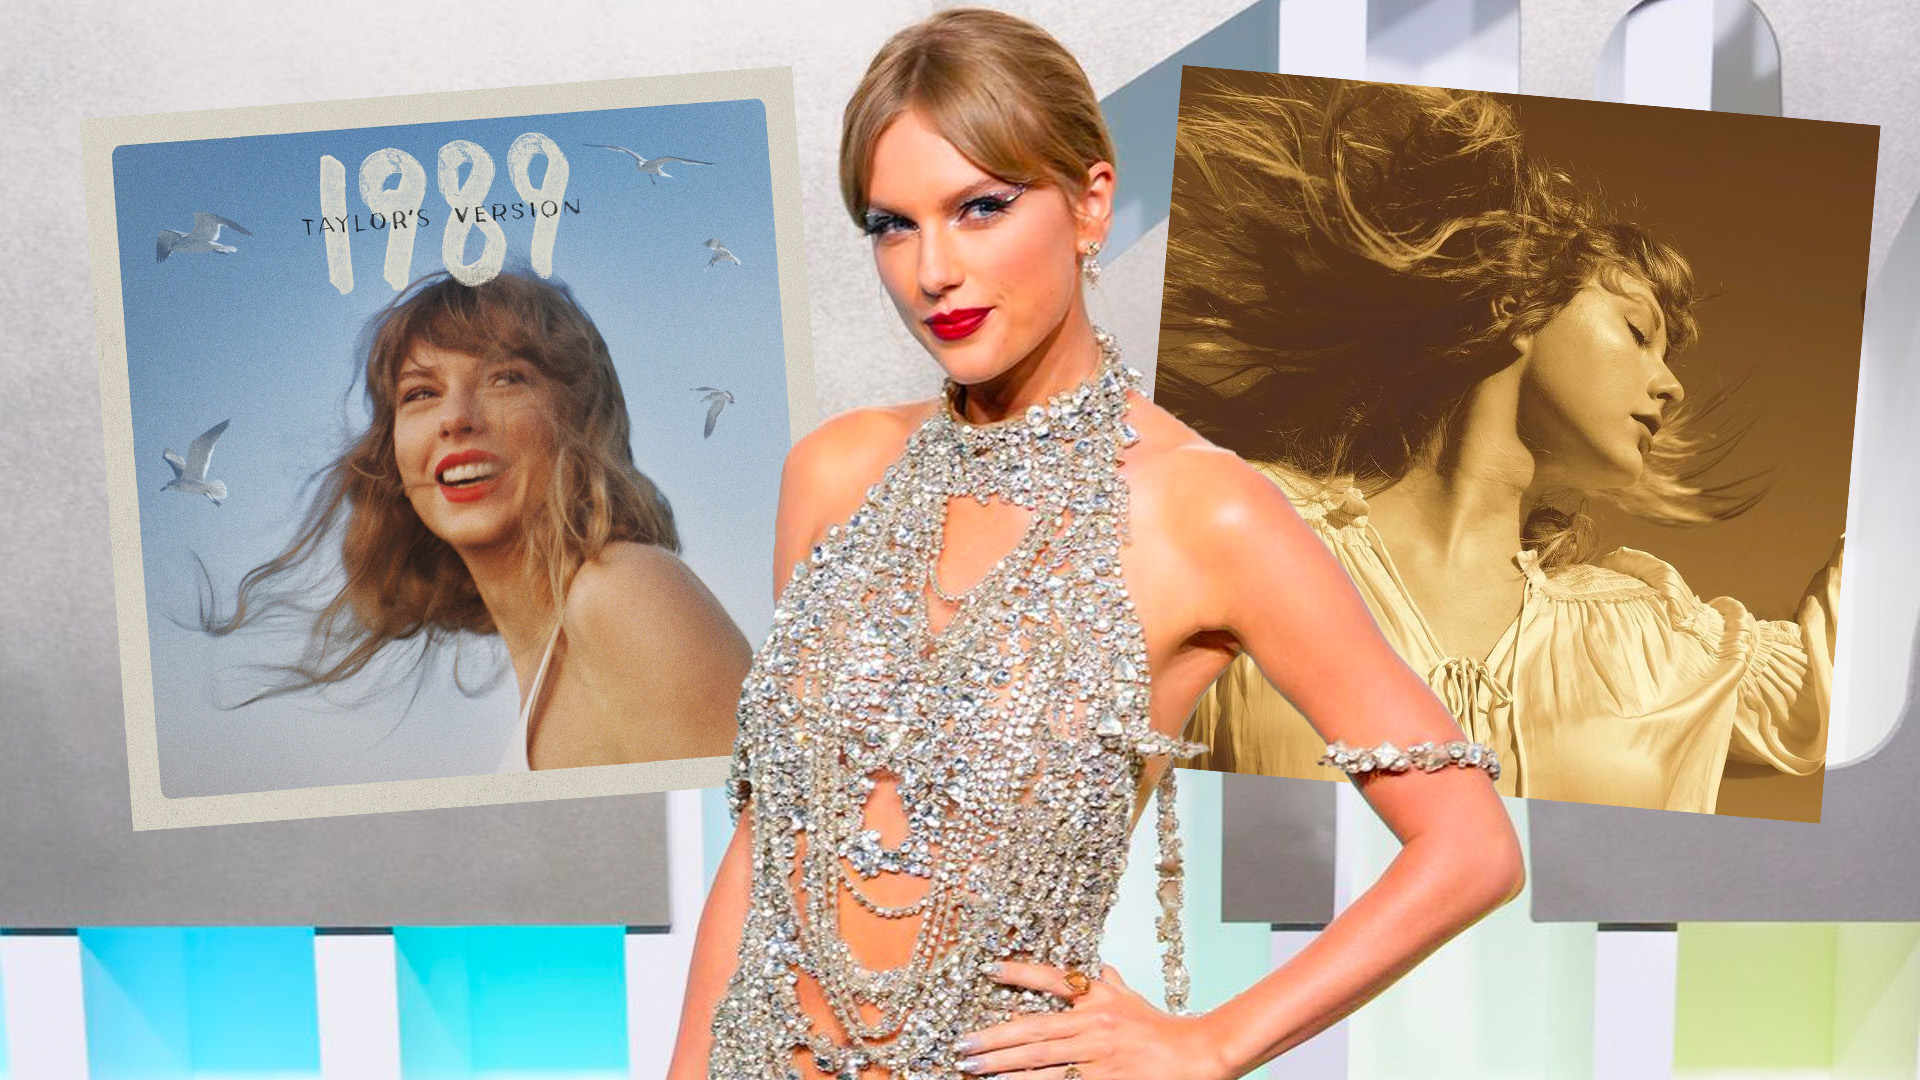 Why is Taylor Swift Re-Releasing All of Her Albums? (Taylor's Version)